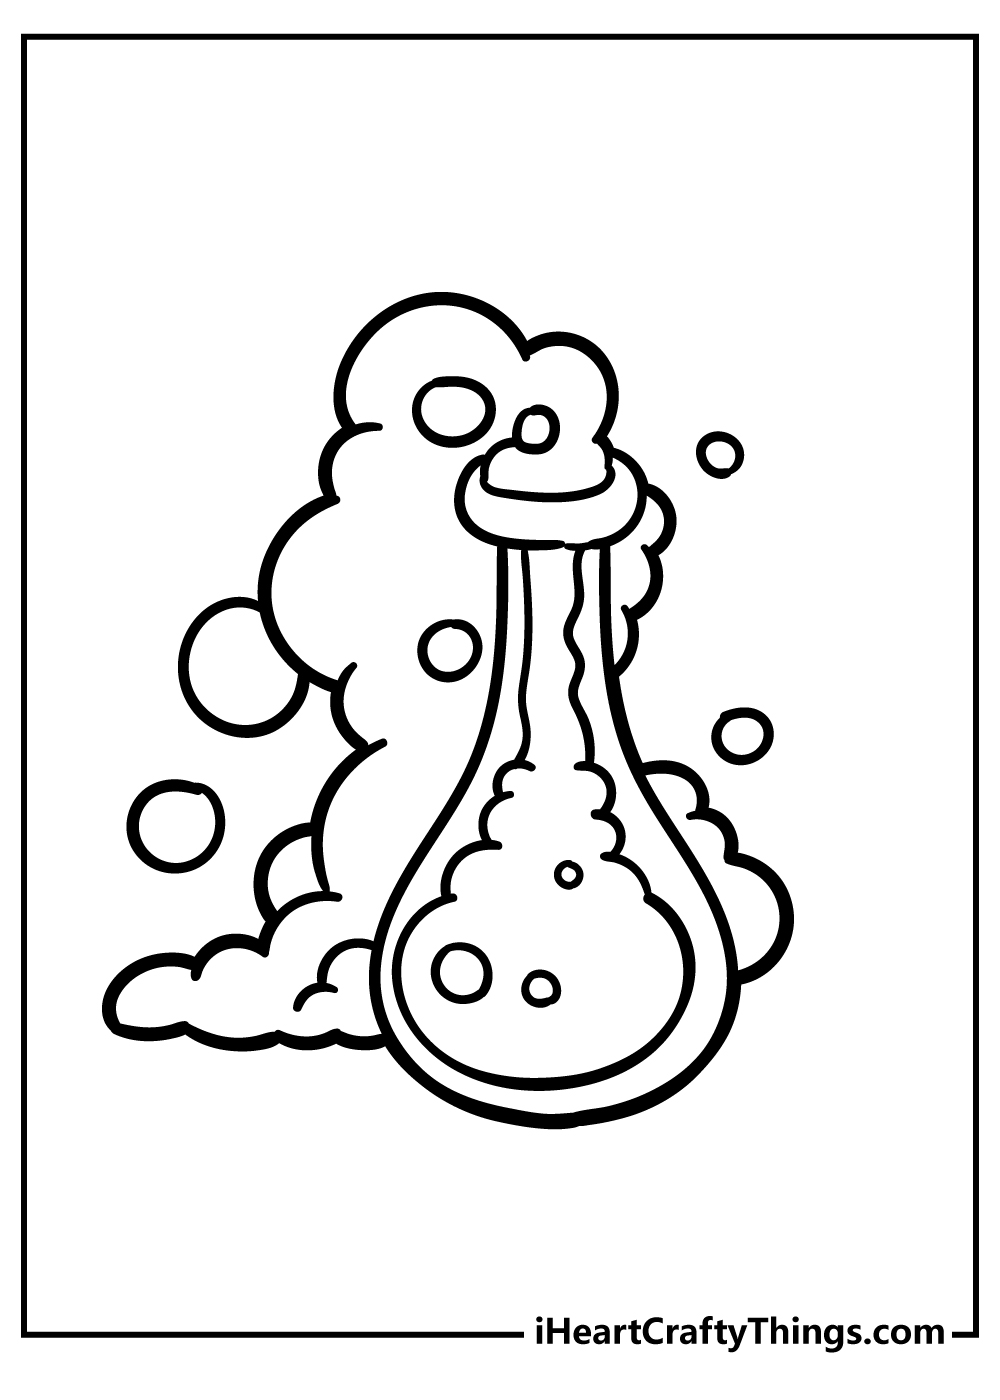 Science coloring pages free printables